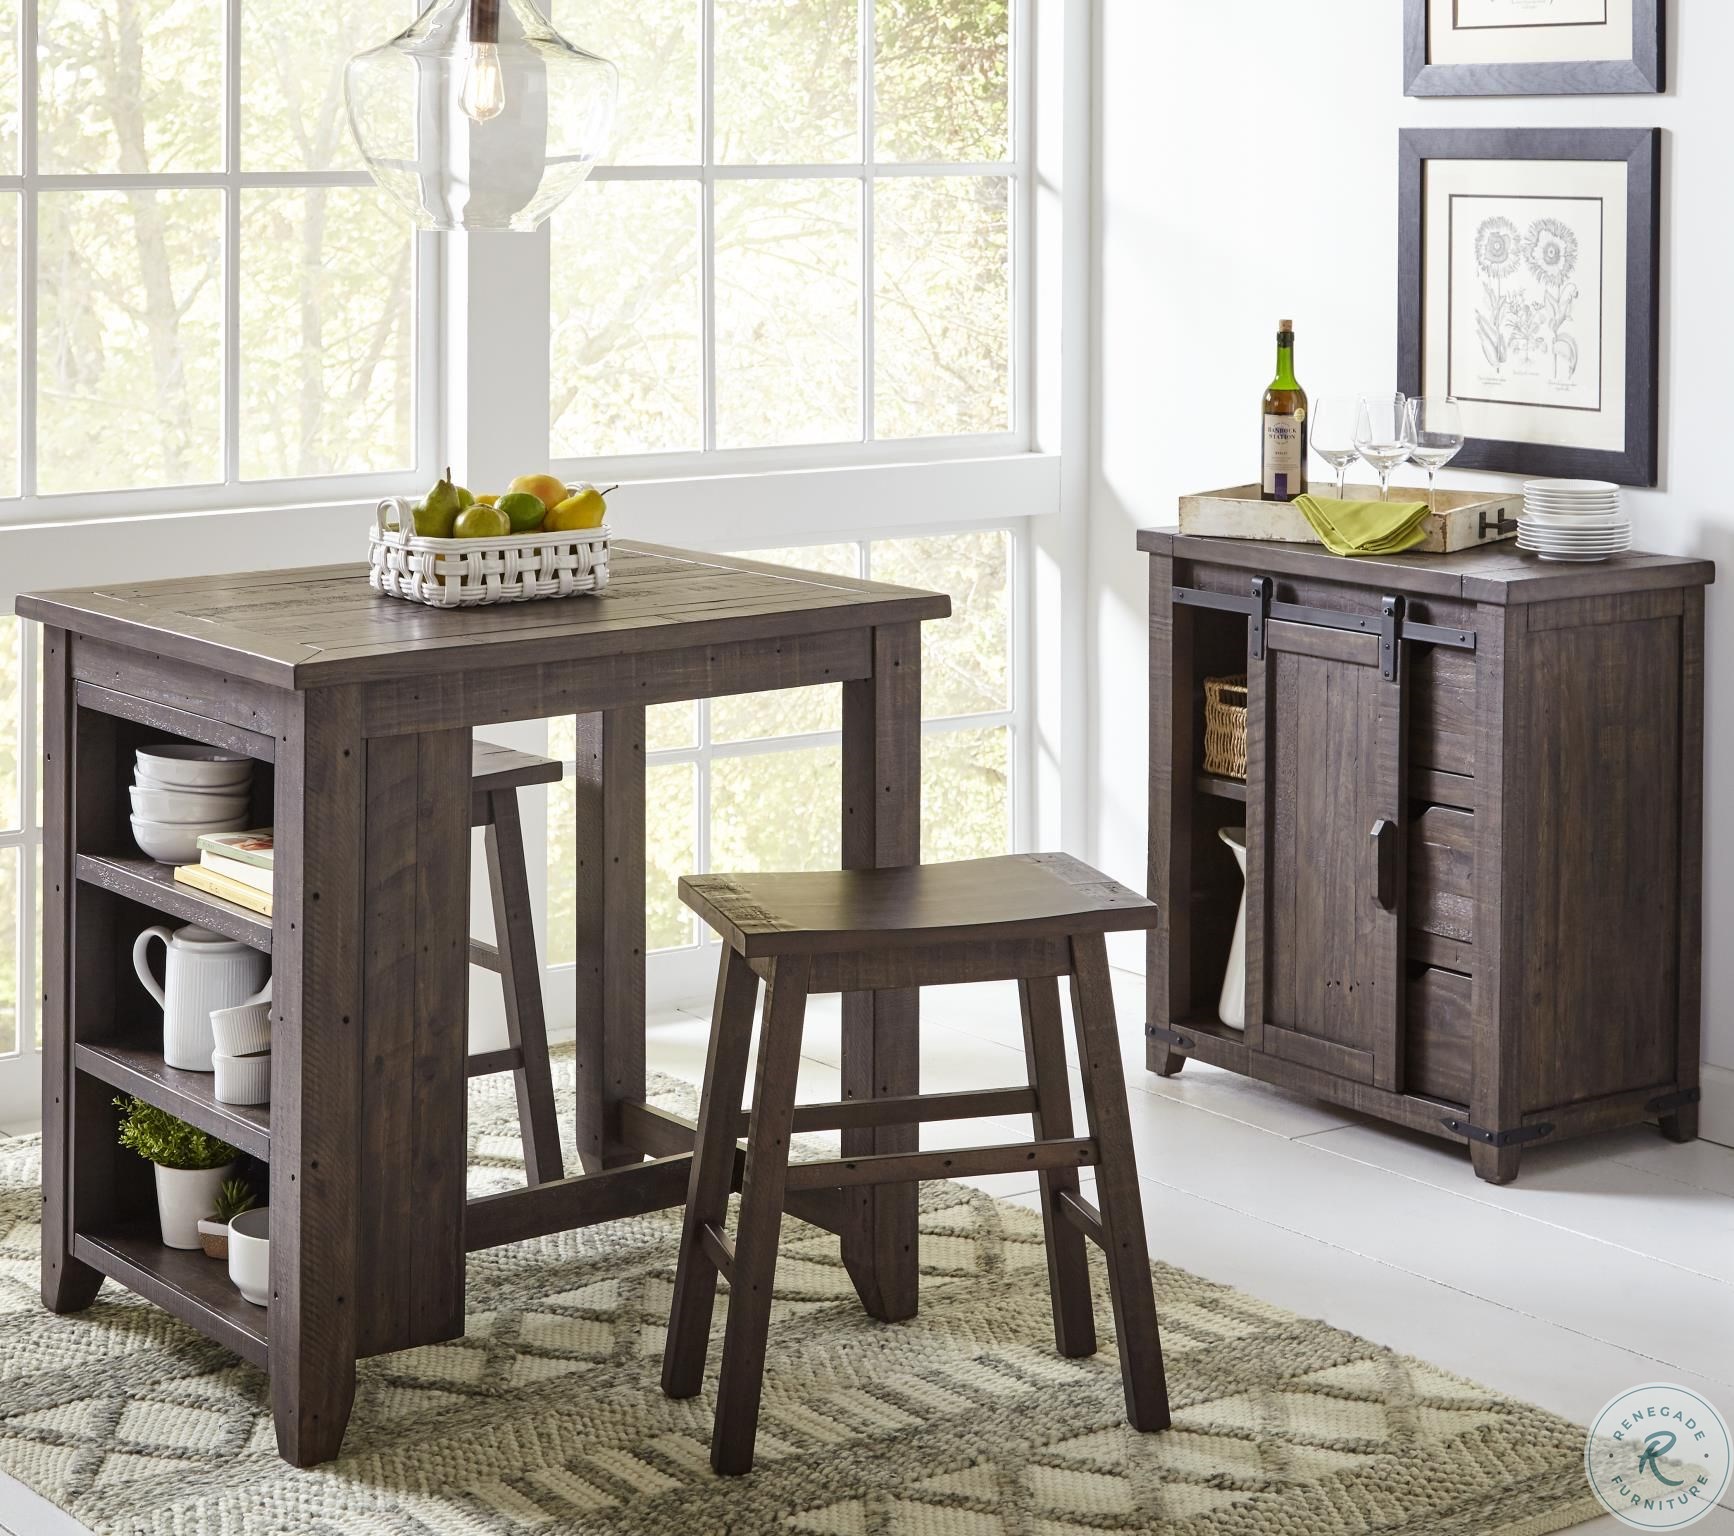 Madison County Barnwood 3 Piece Counter Height Dining Set